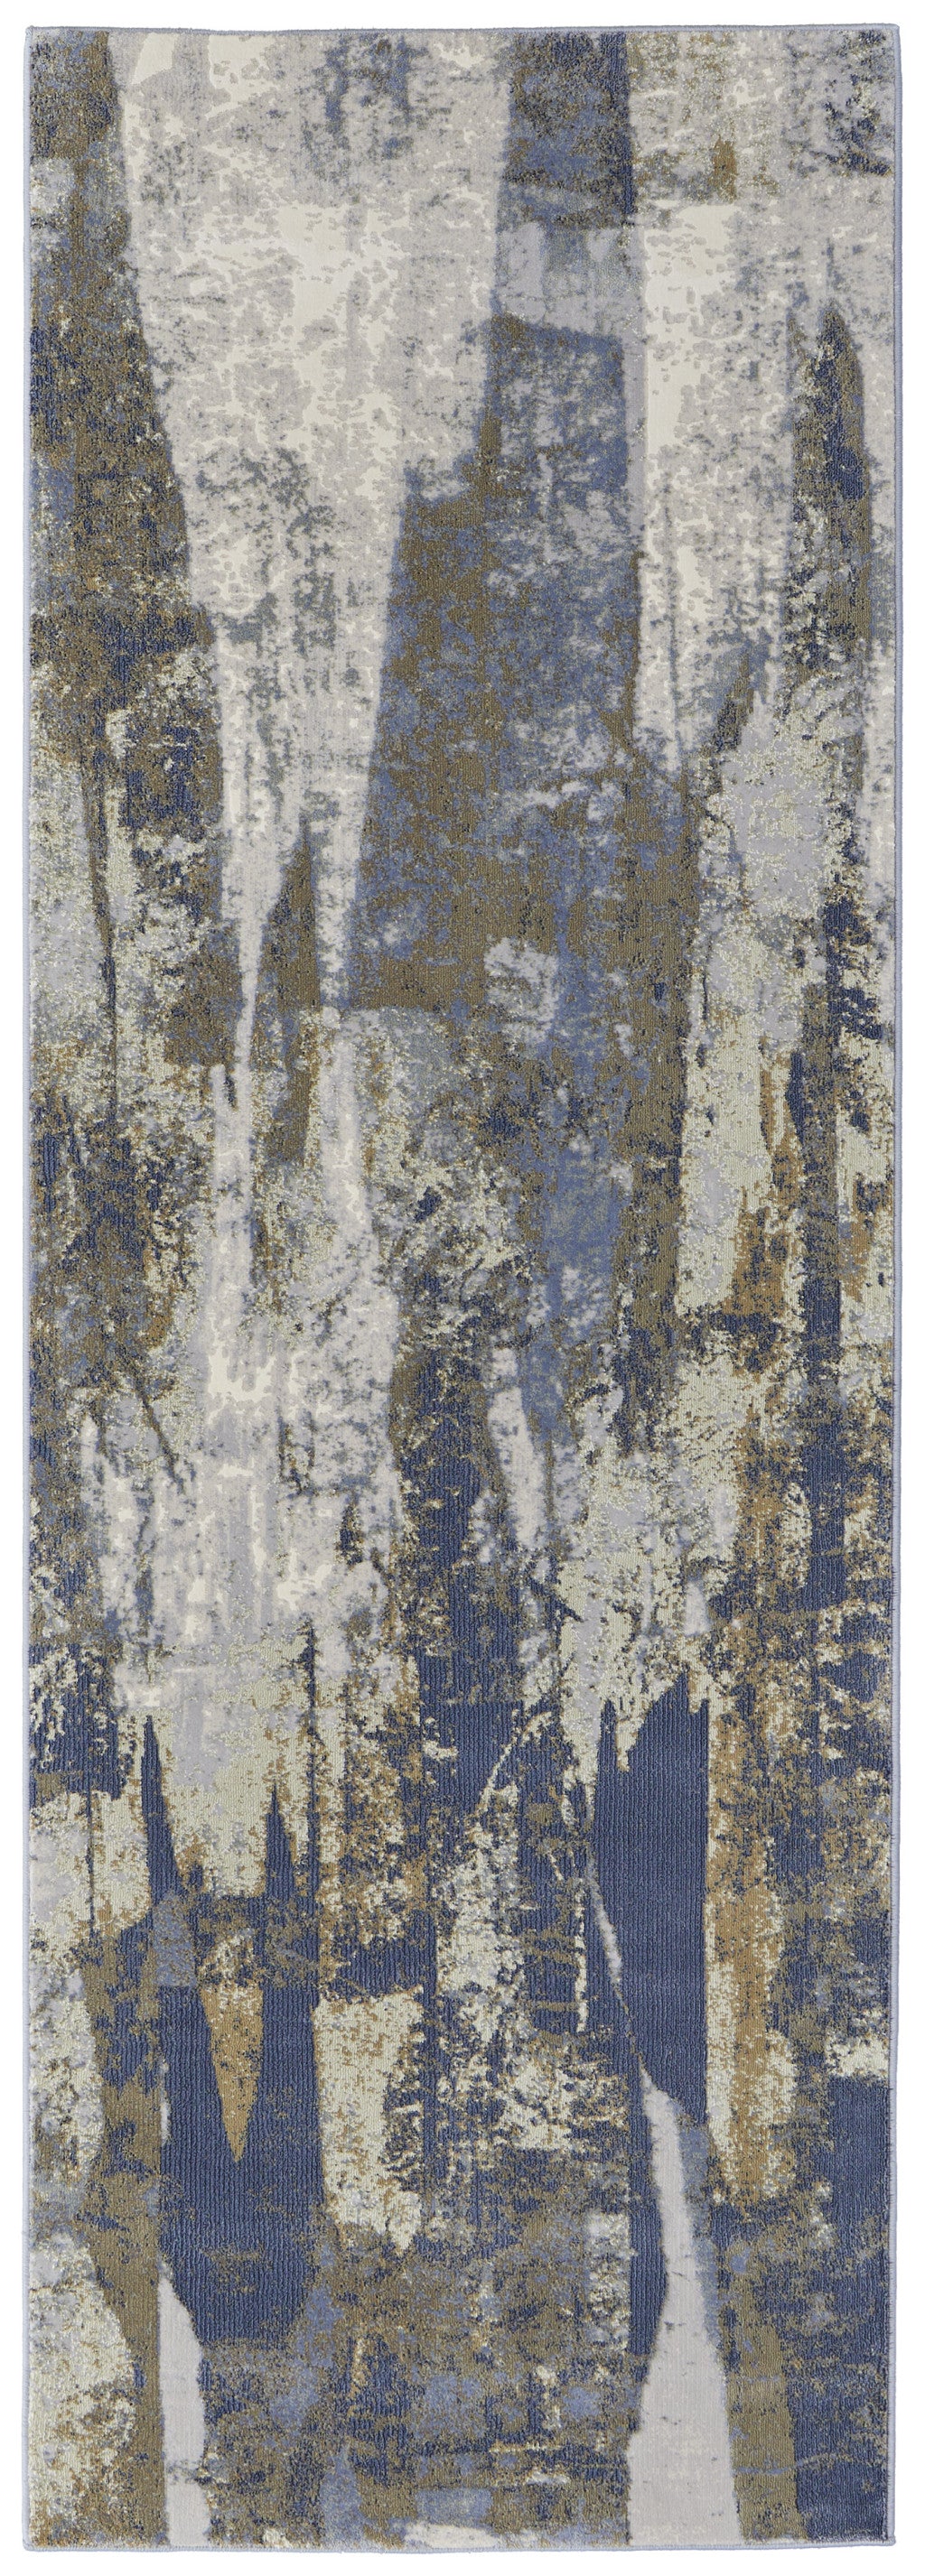 8' X 10' Blue Gray And Tan Abstract Power Loom Distressed Area Rug